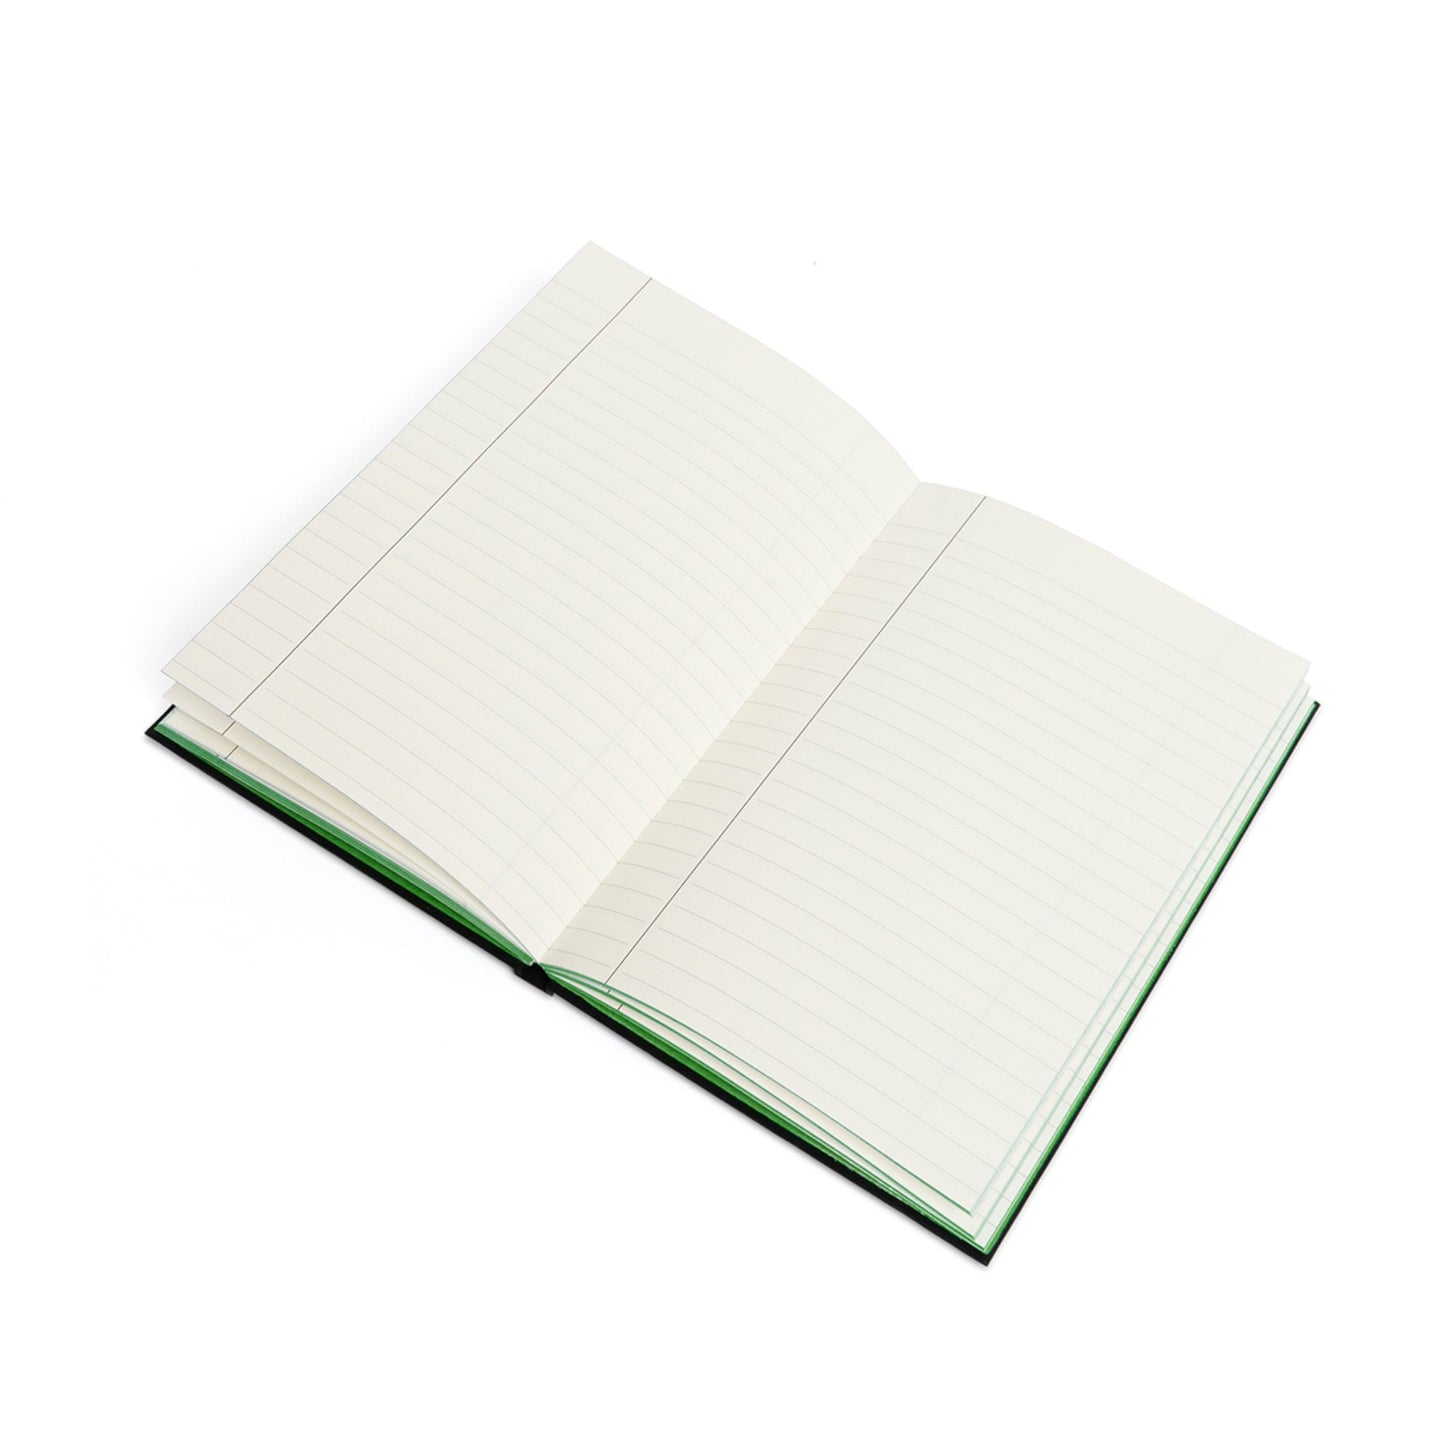 True Crime - color contrast notebook - Ruled -  Choice of 4 colors